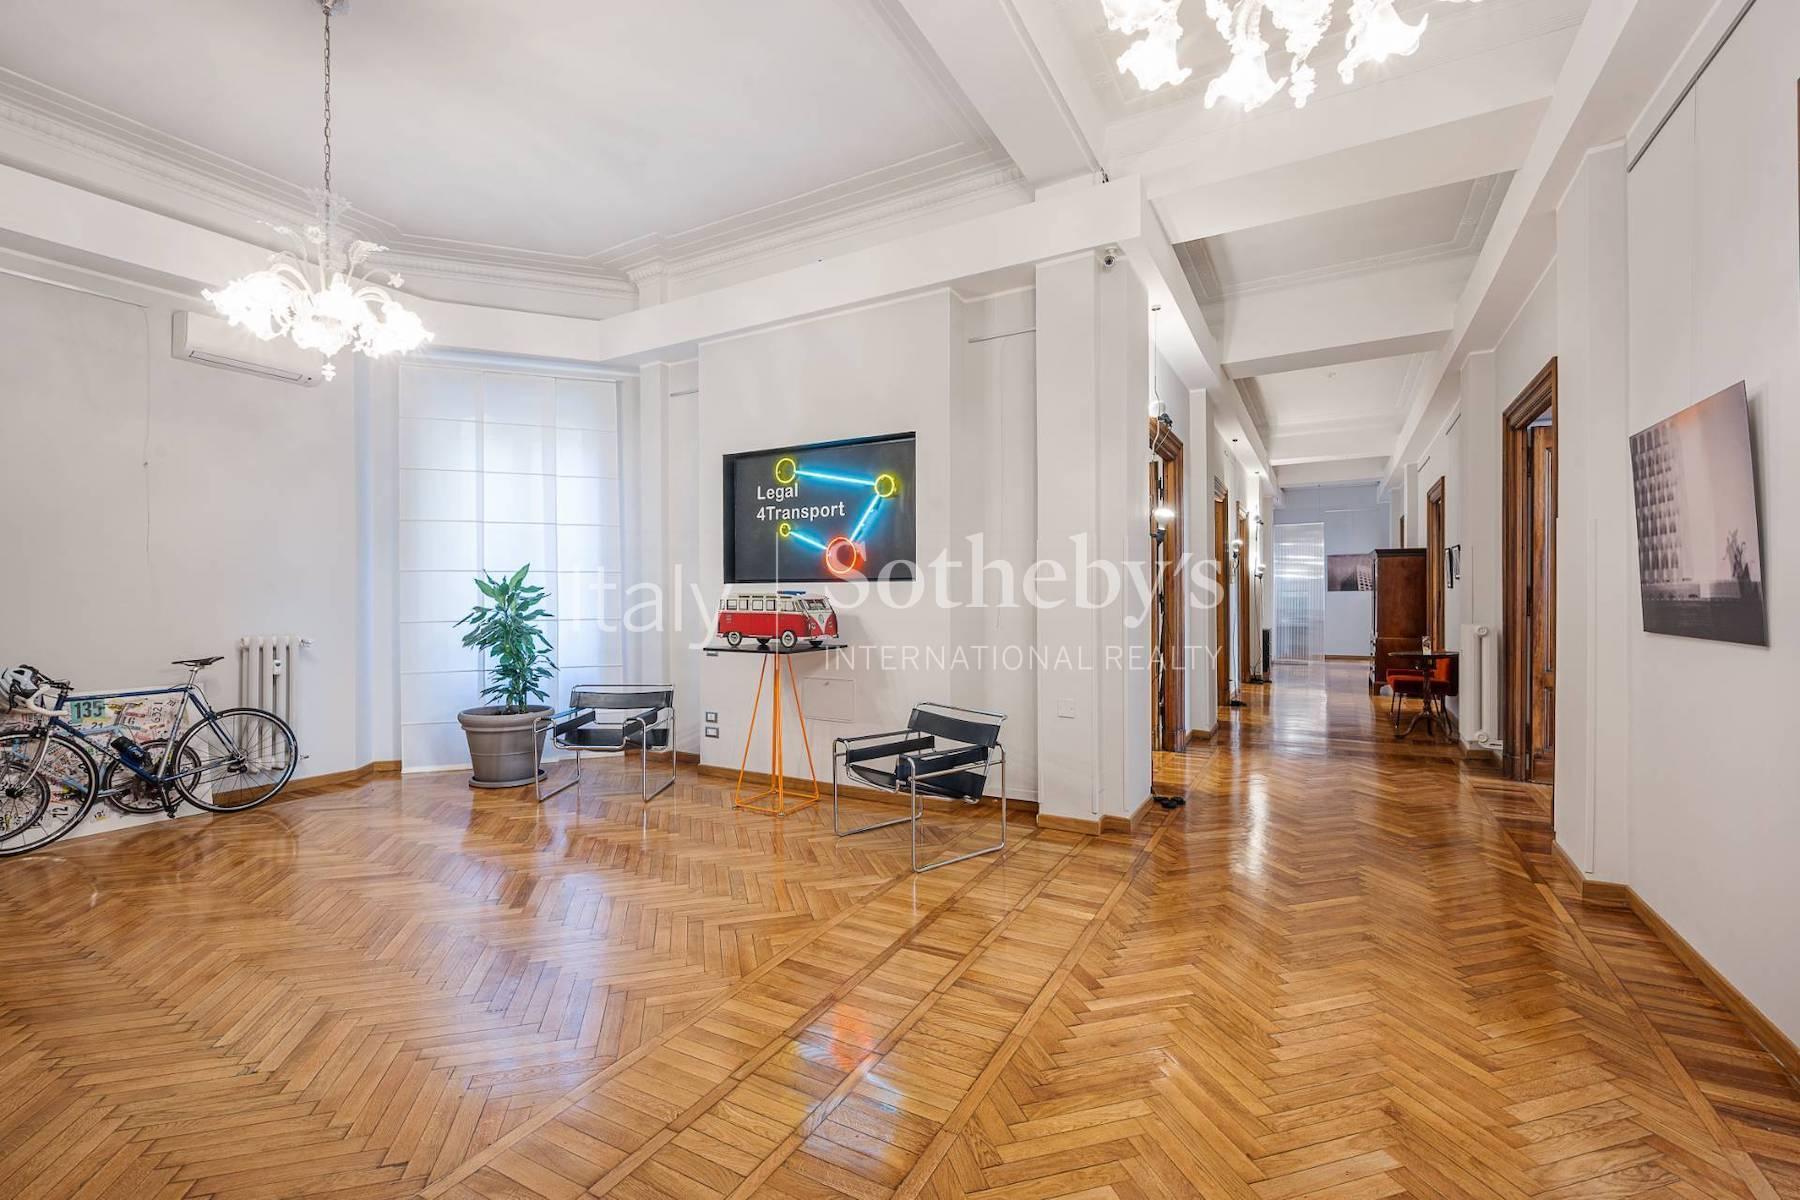 Prestigious office a stone's throw from Piazza Spagna - 5